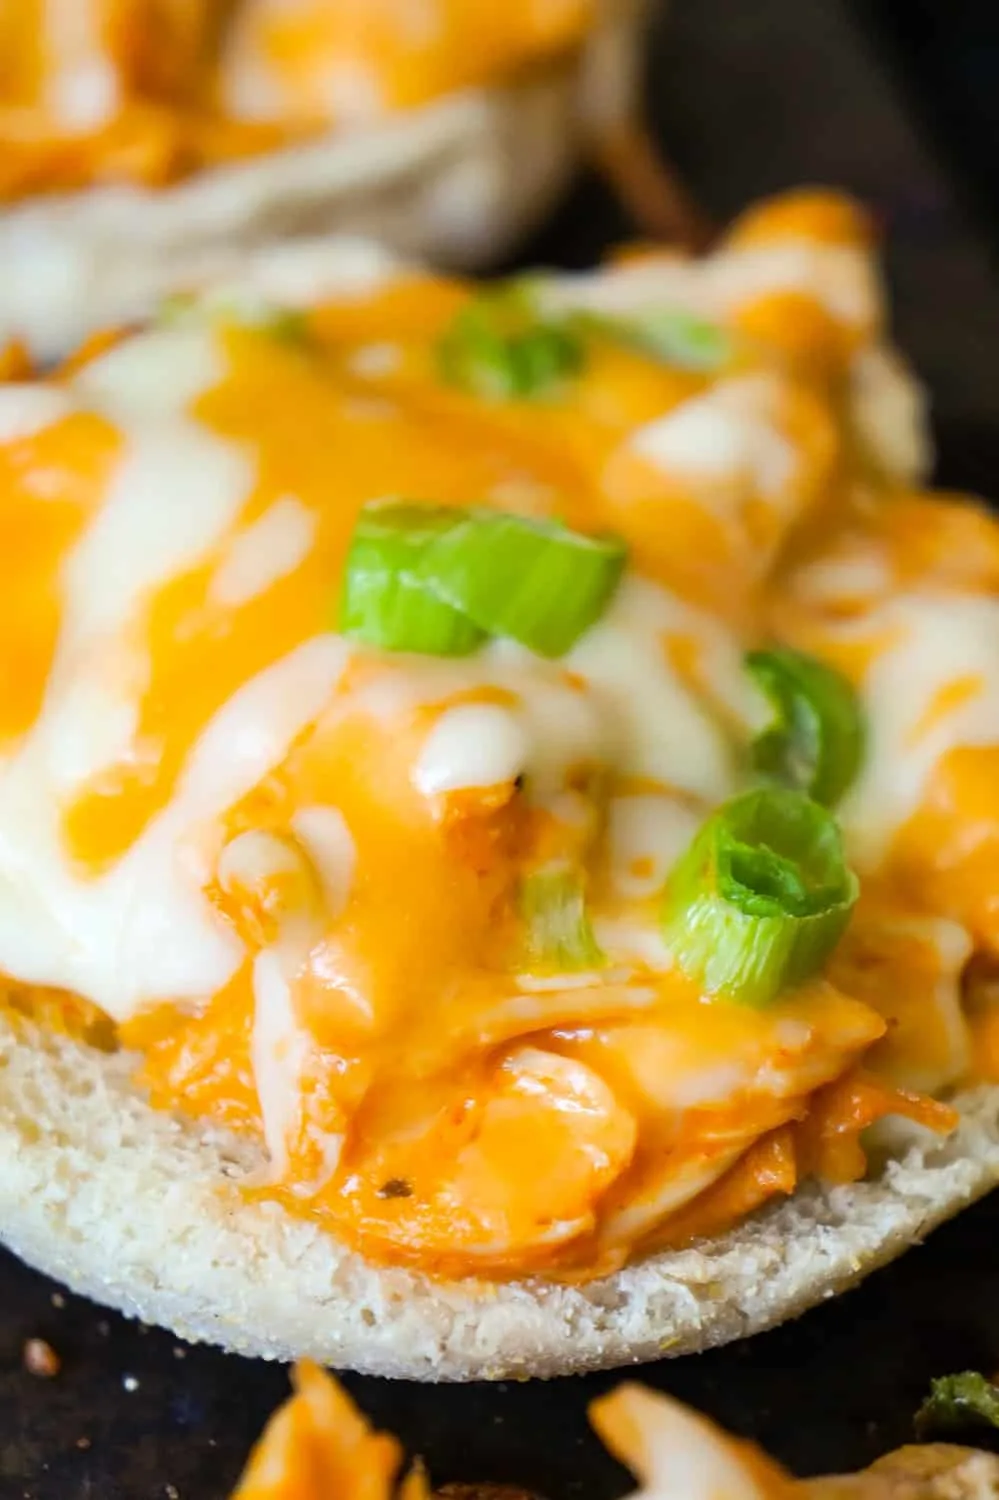 Buffalo Chicken English Muffins are an easy weeknight dinner recipe using rotisserie chicken. These English muffins are topped with shredded chicken tossed in Buffalo sauce and baked with cheese on top.